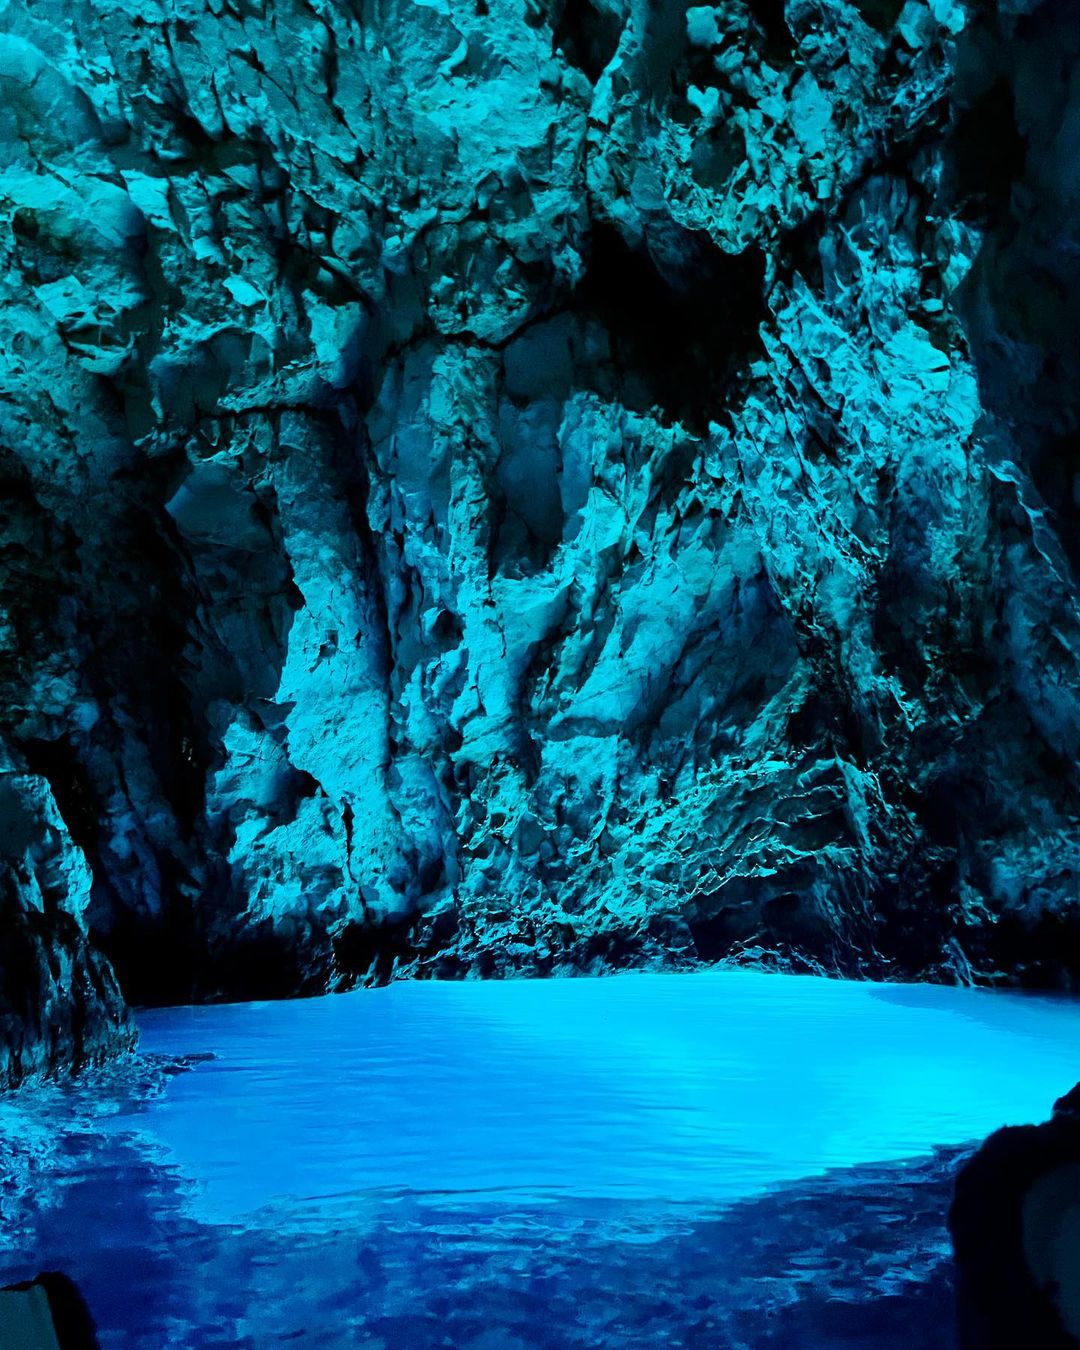 The enchanting glow of the Blue Grotto